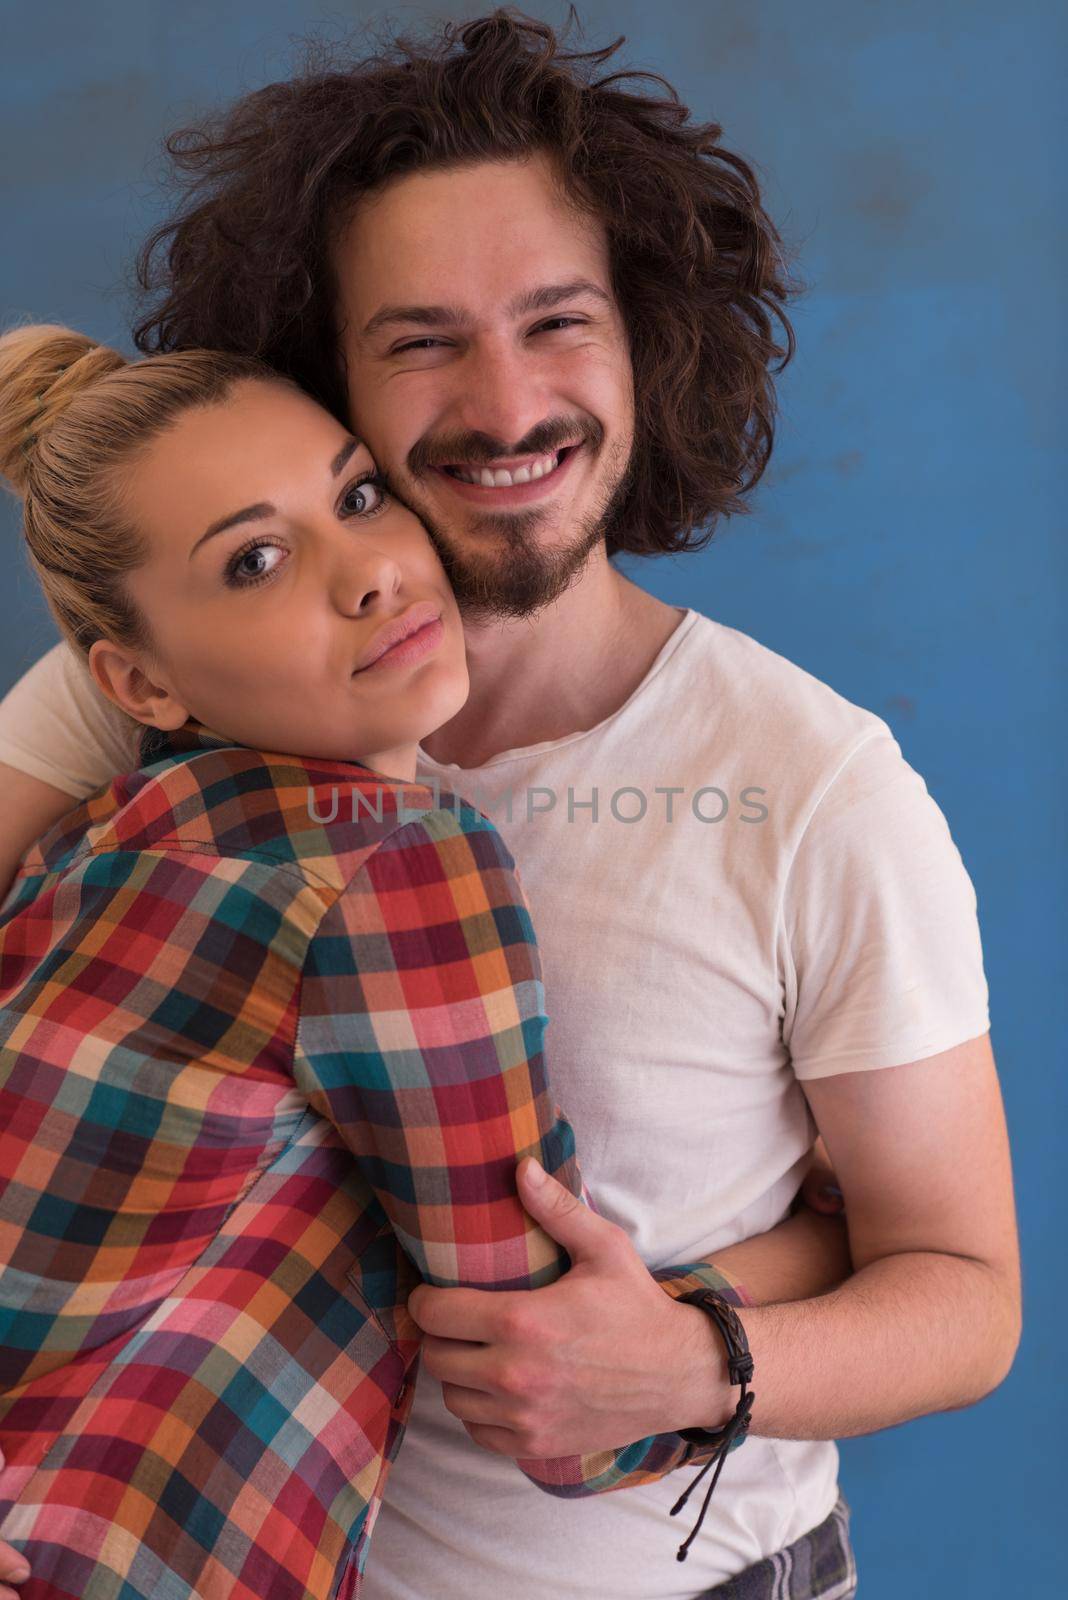 Portrait of a happy young smiling couple in love  over color background